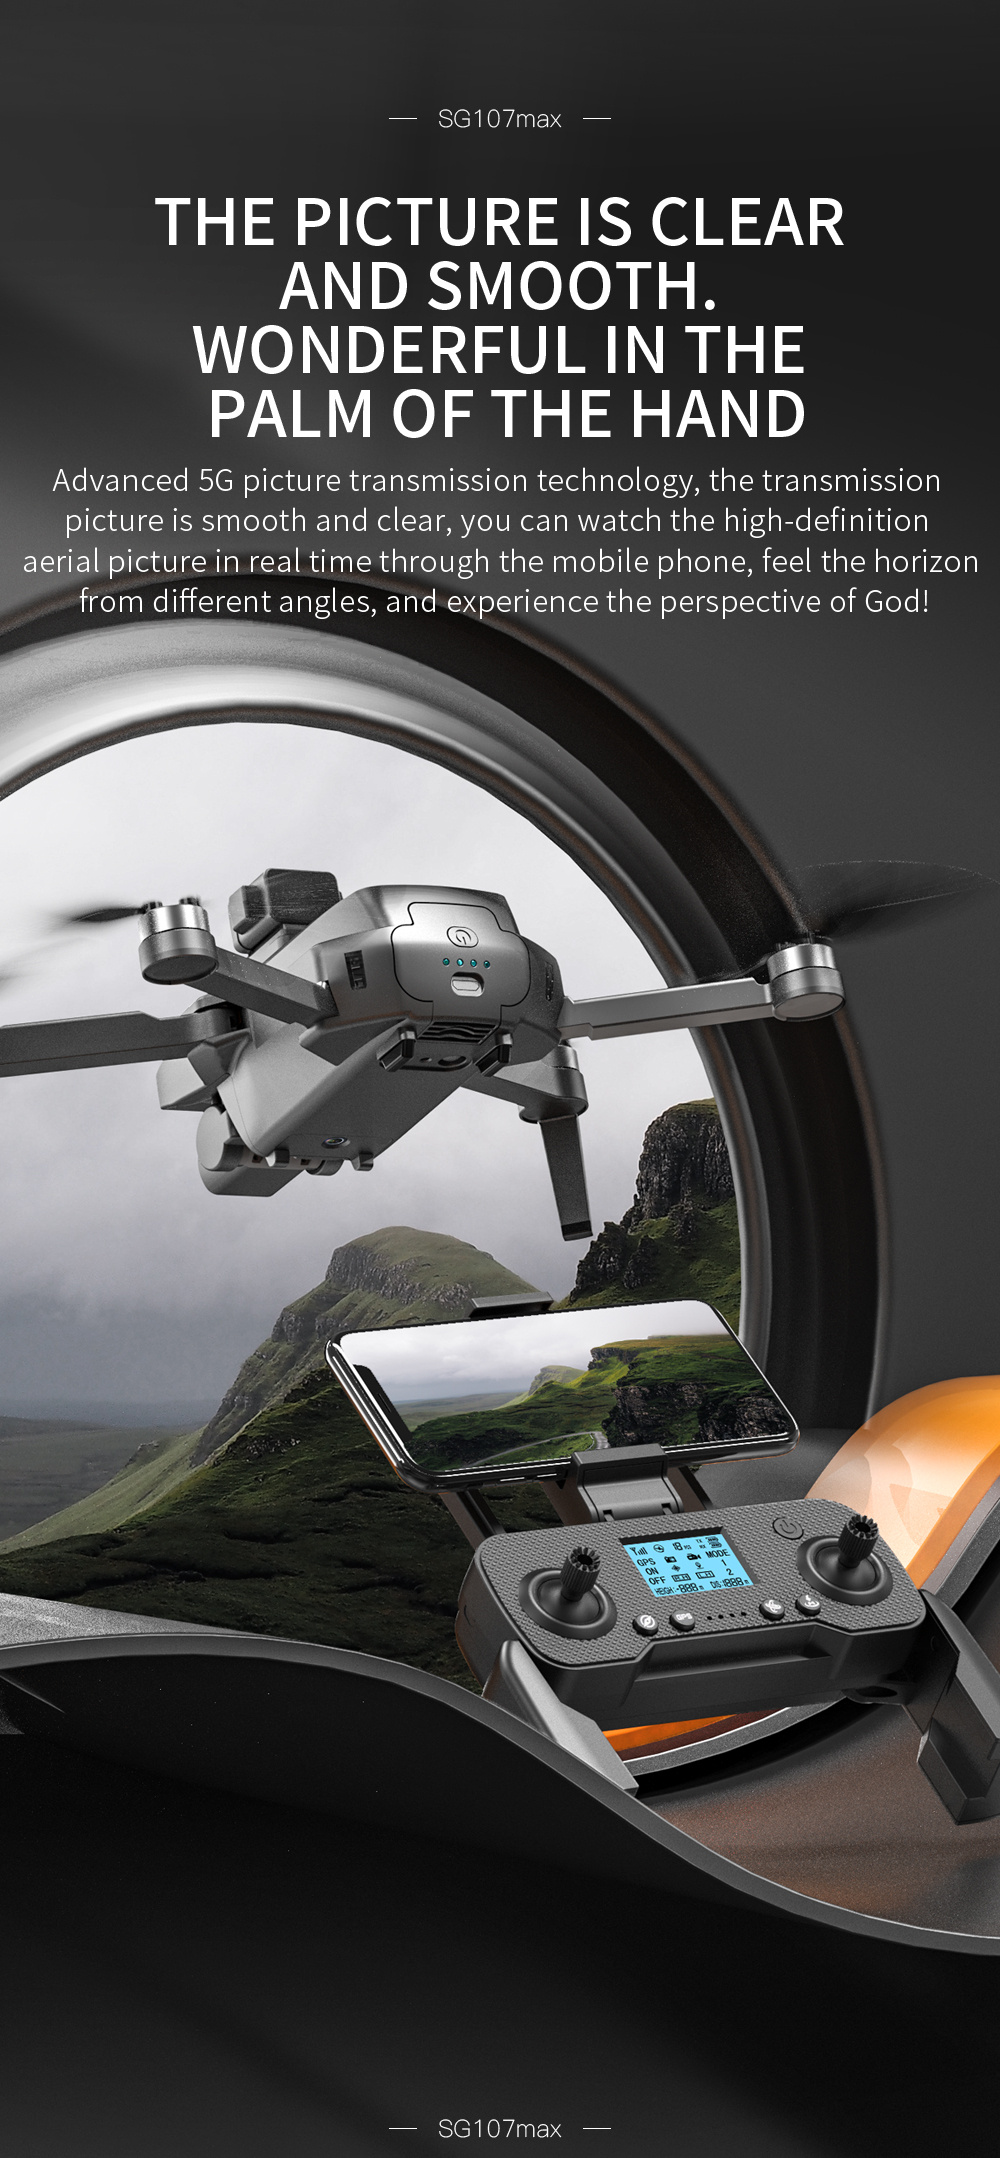 drone with gps follow obstacle avoidance hd dual camera optical flow positioning brushless motor real time transmission wifi connection app control details 2